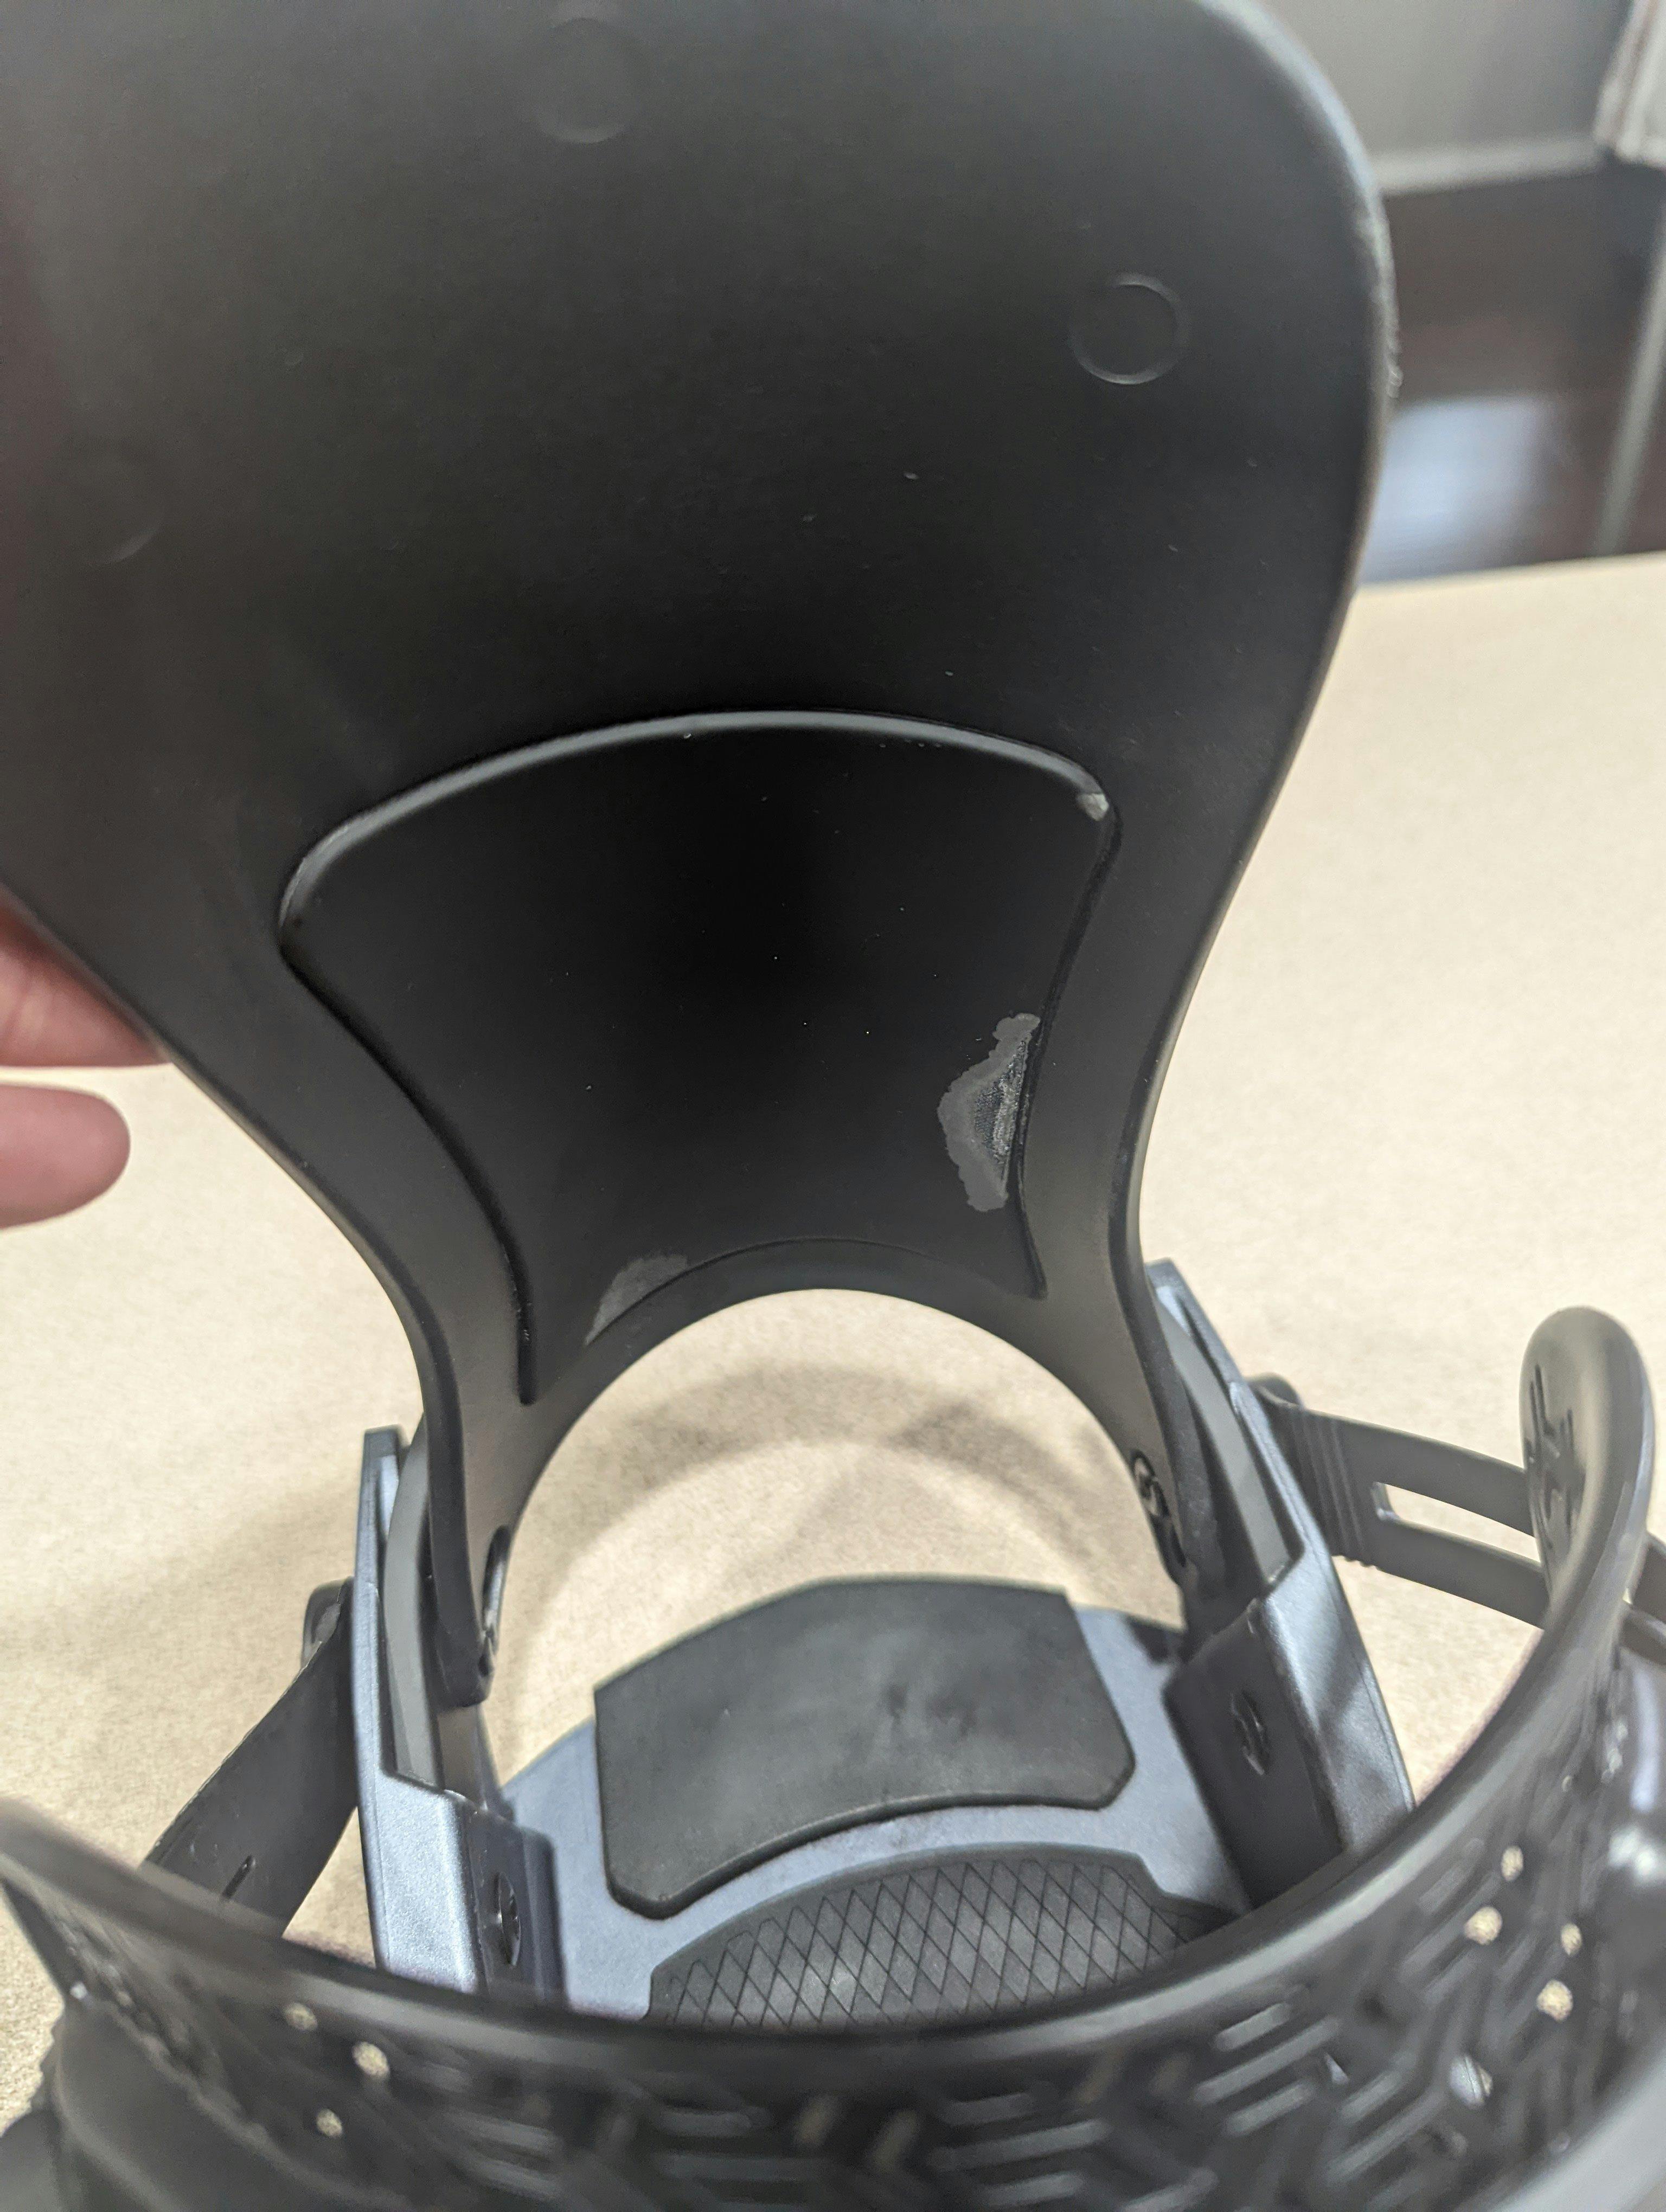 Showing the wear on the inside of the Union Atlas Snowboard Binding.